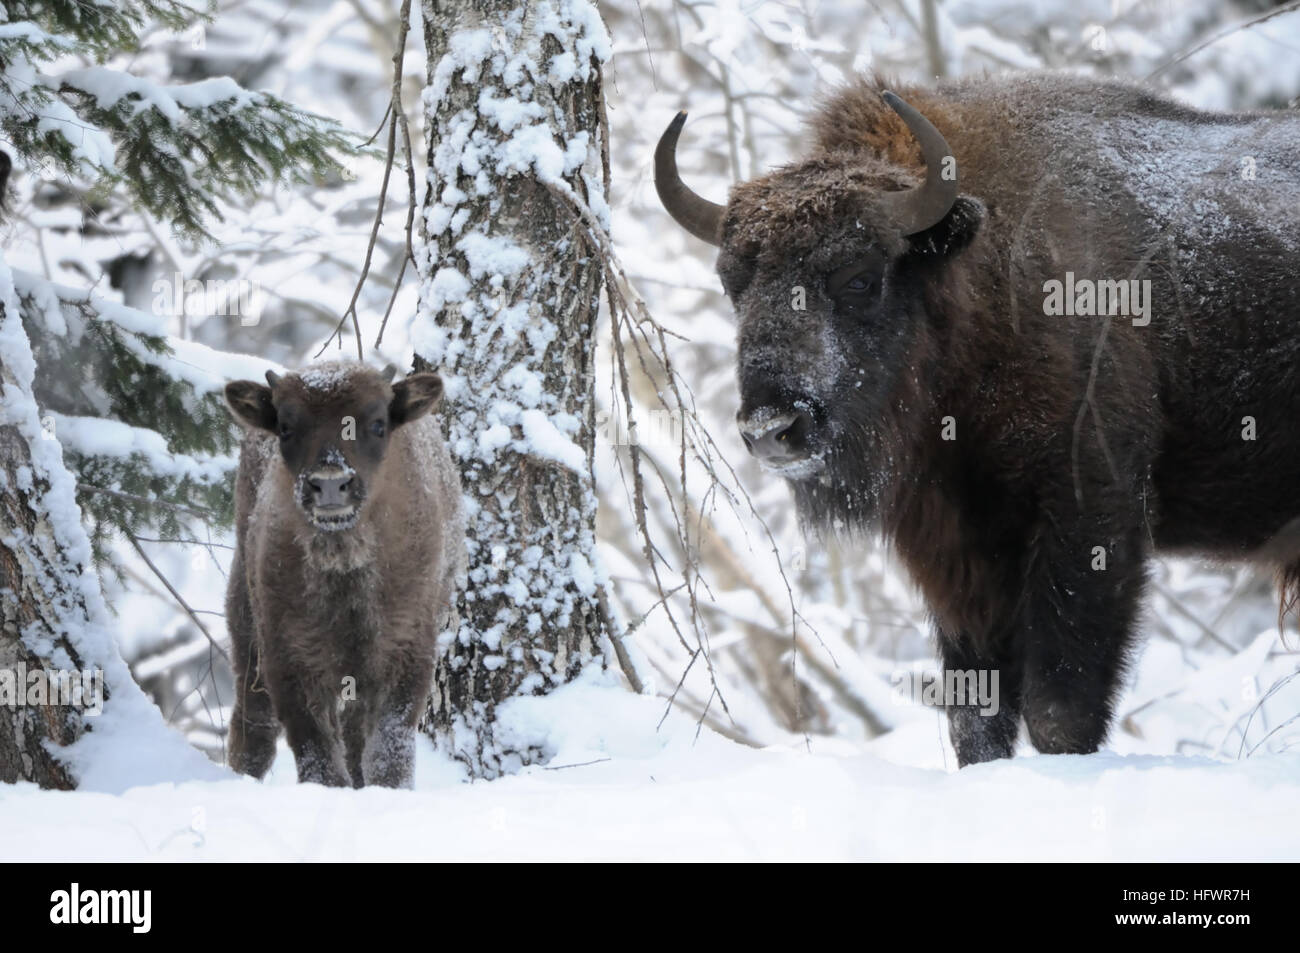 Adult and baby European bisons (Wisent, Bison bonasus) in winter forest. National park Ugra, Kaluga region, Russia. December, 2016 Stock Photo